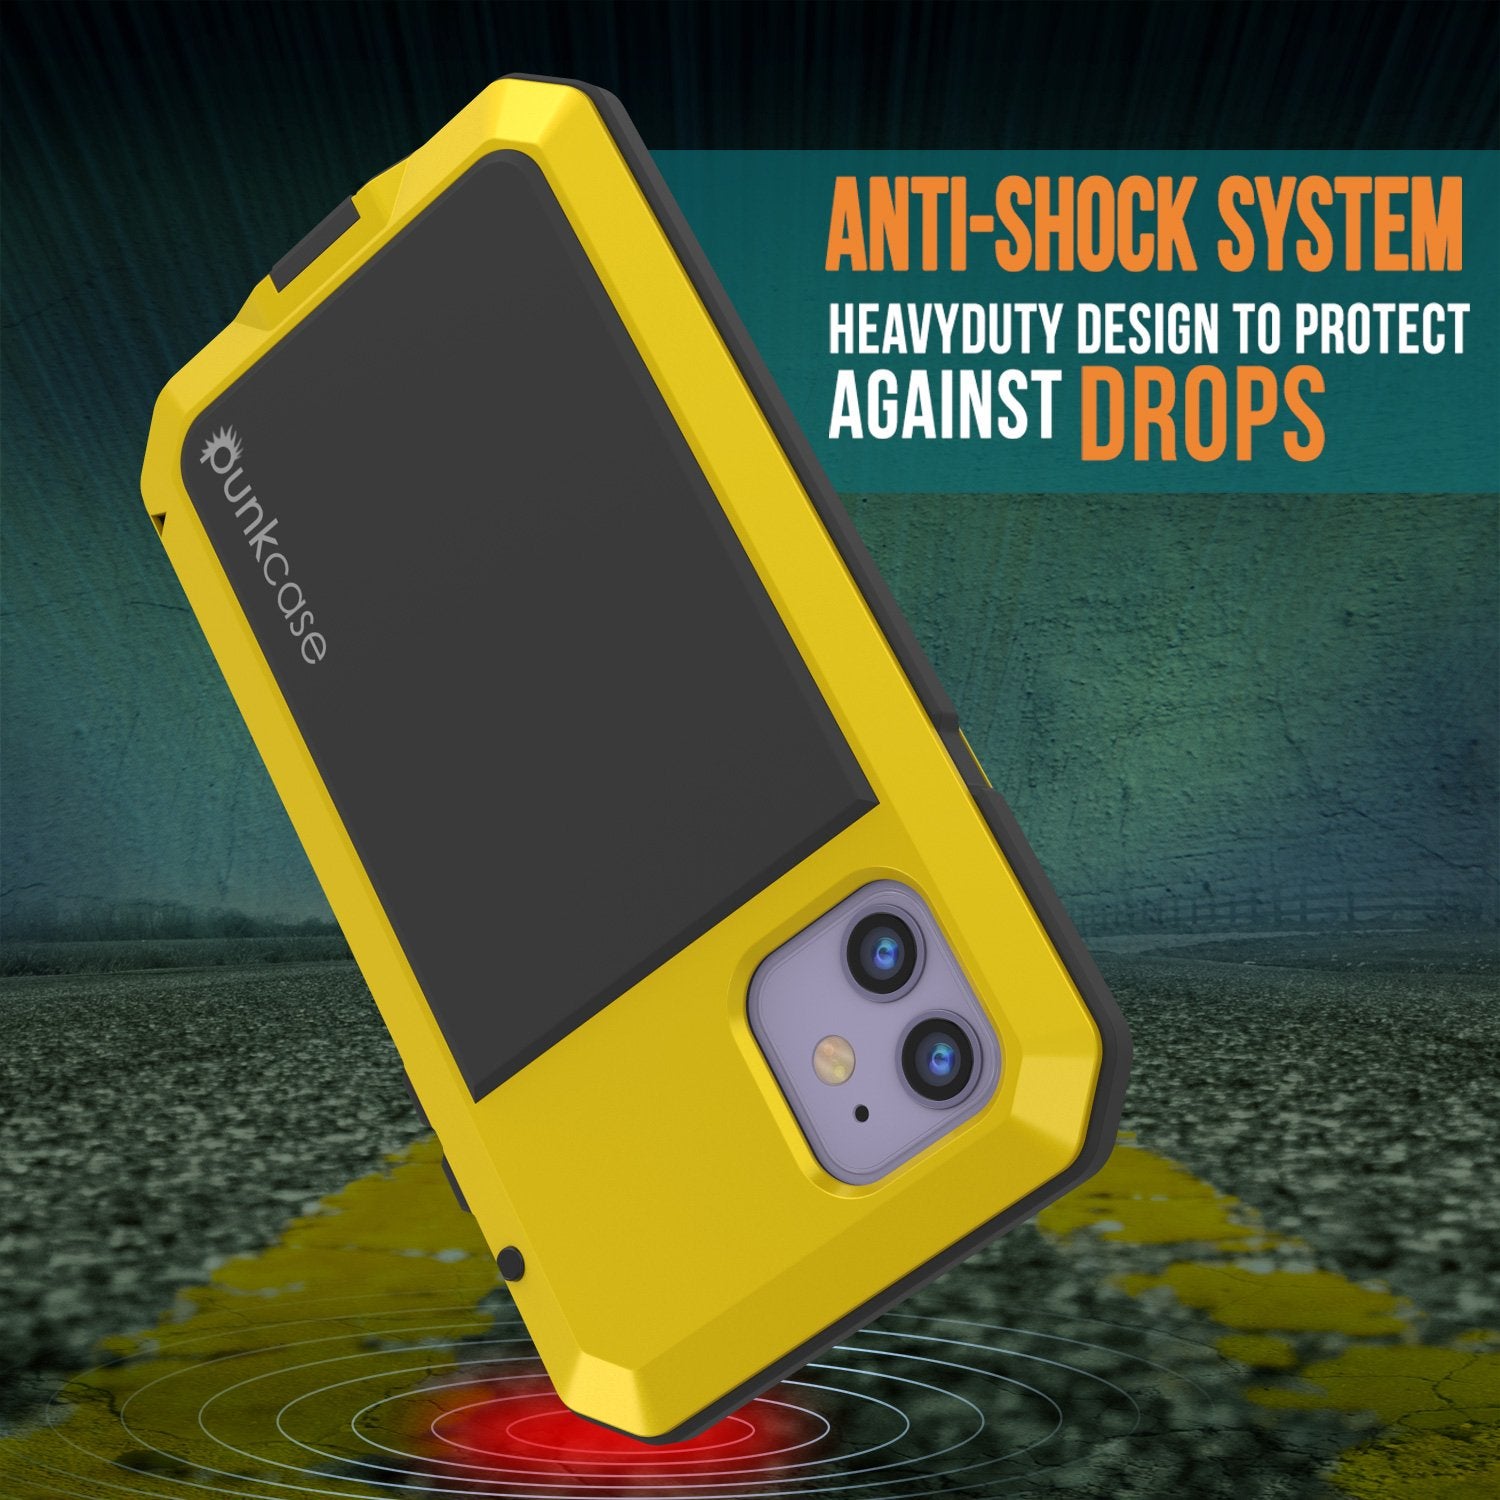 iPhone 11 Metal Case, Heavy Duty Military Grade Armor Cover [shock proof] Full Body Hard [Neon]